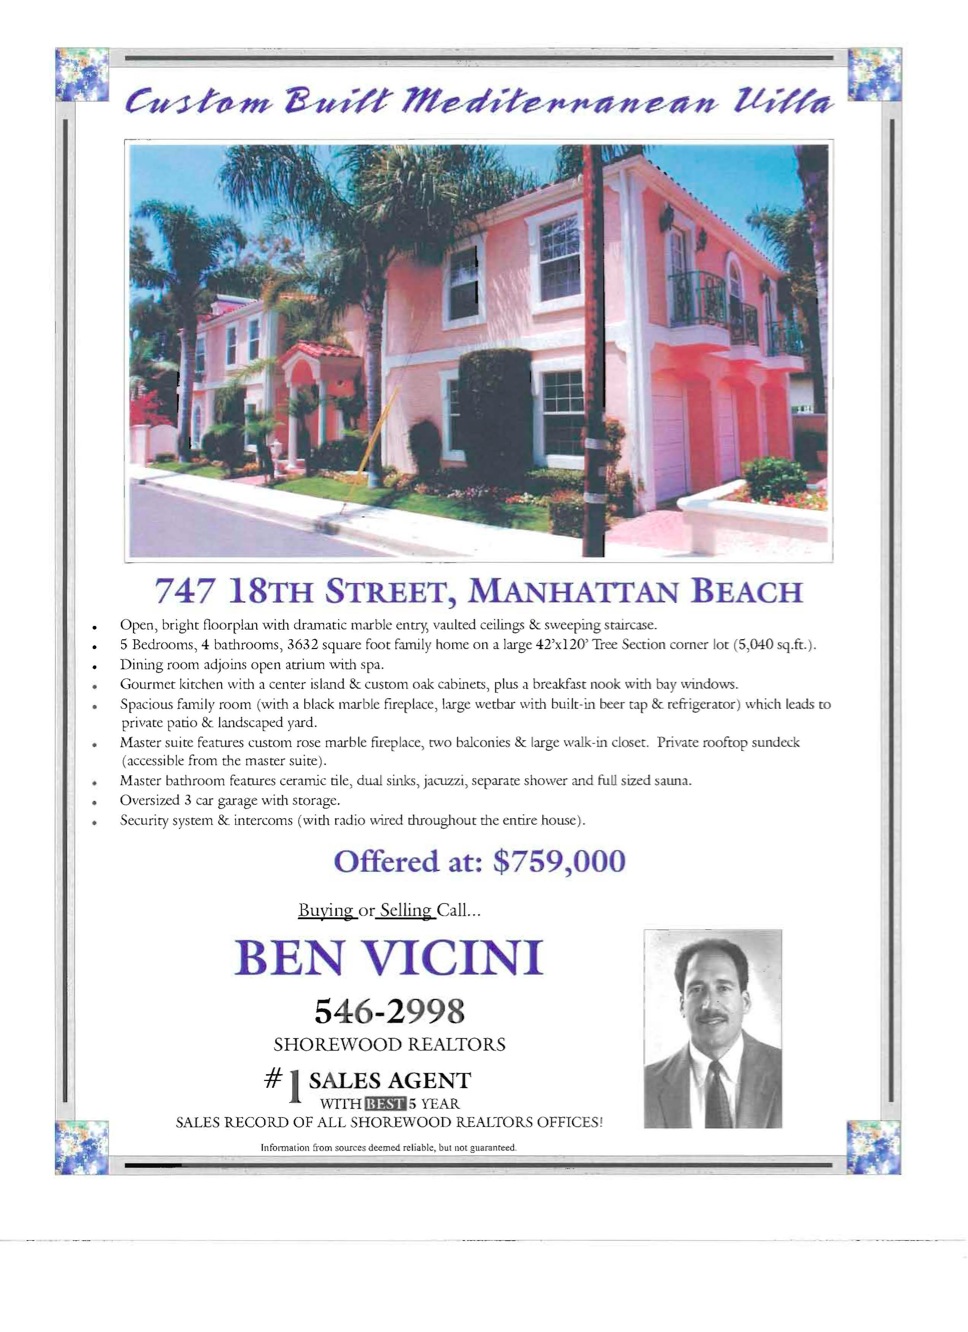 Vicini's Past Listings & Sales_Page_62